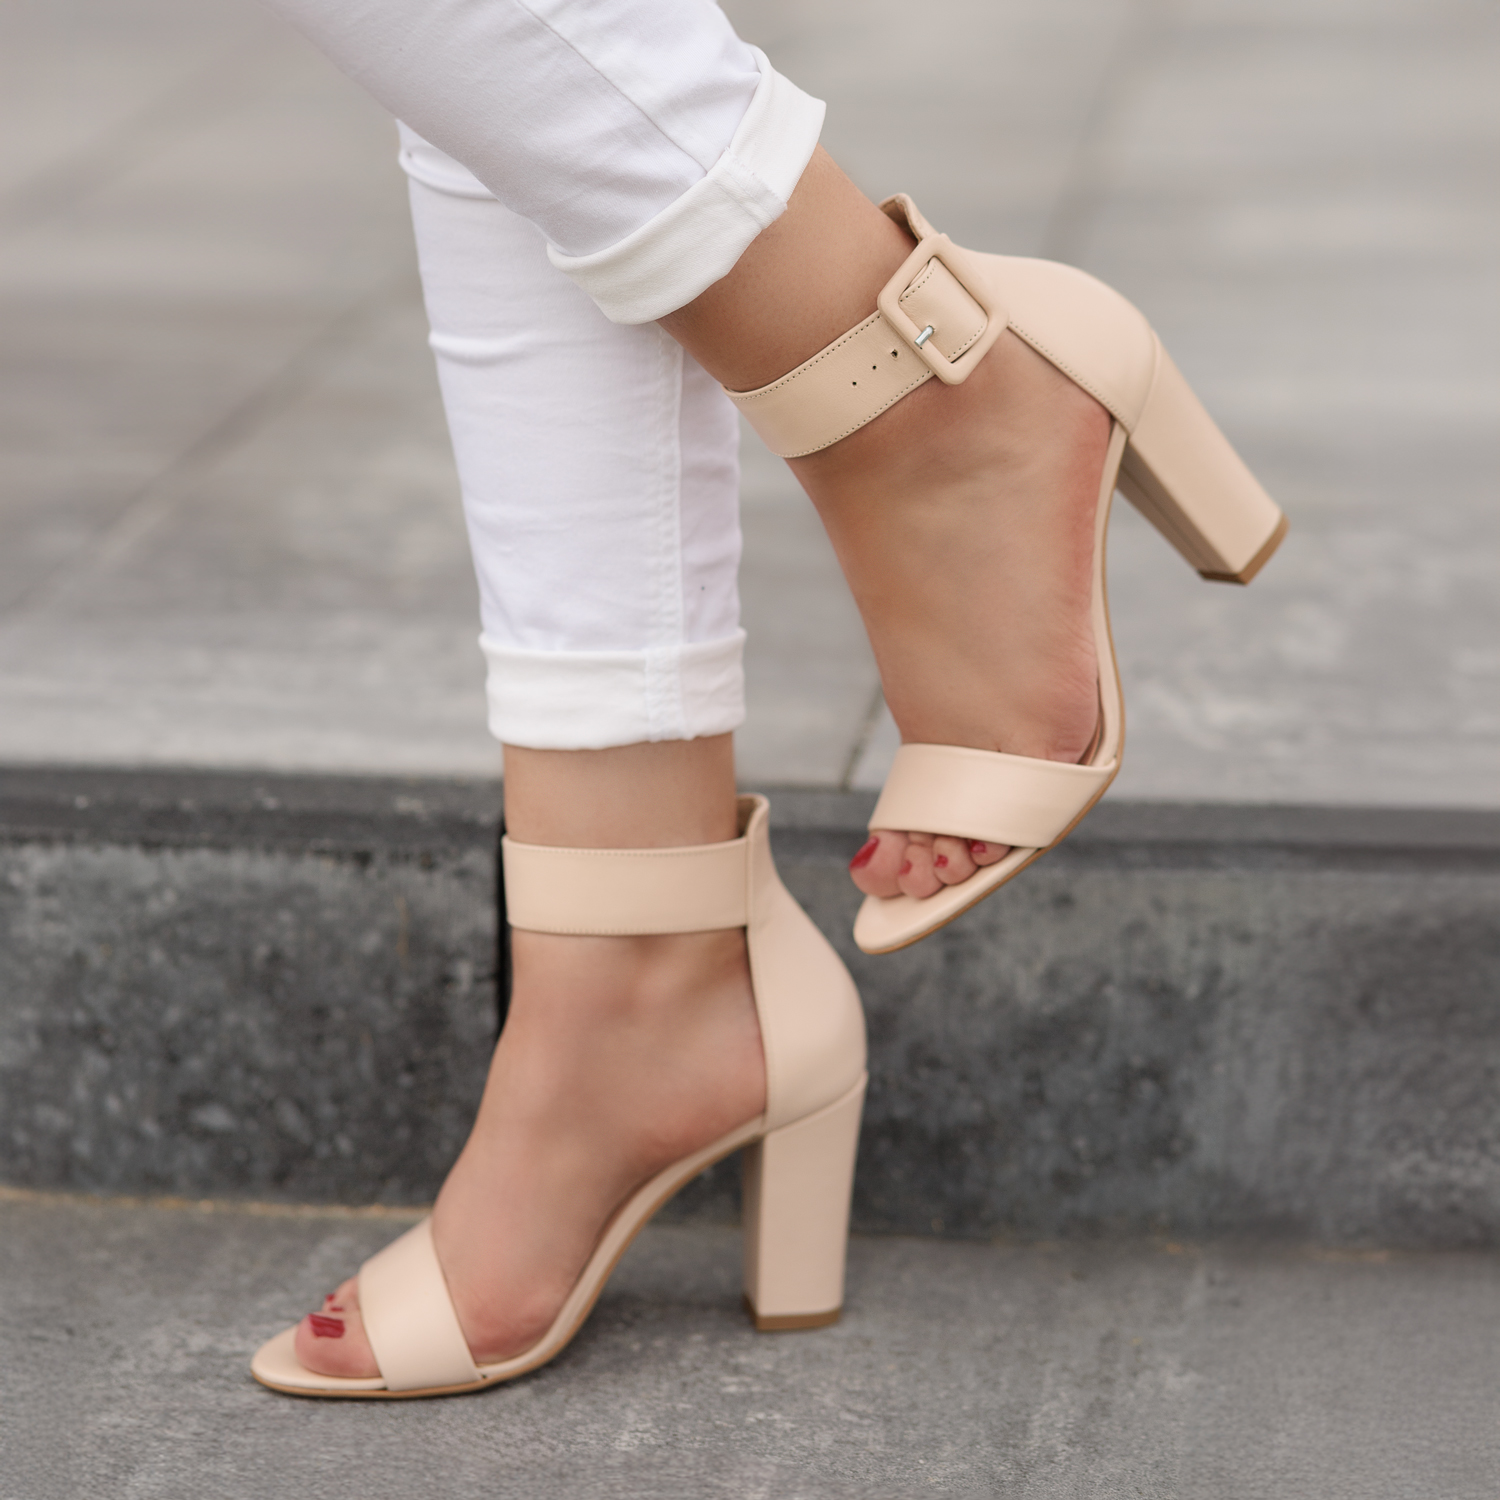  Beige leather sandals